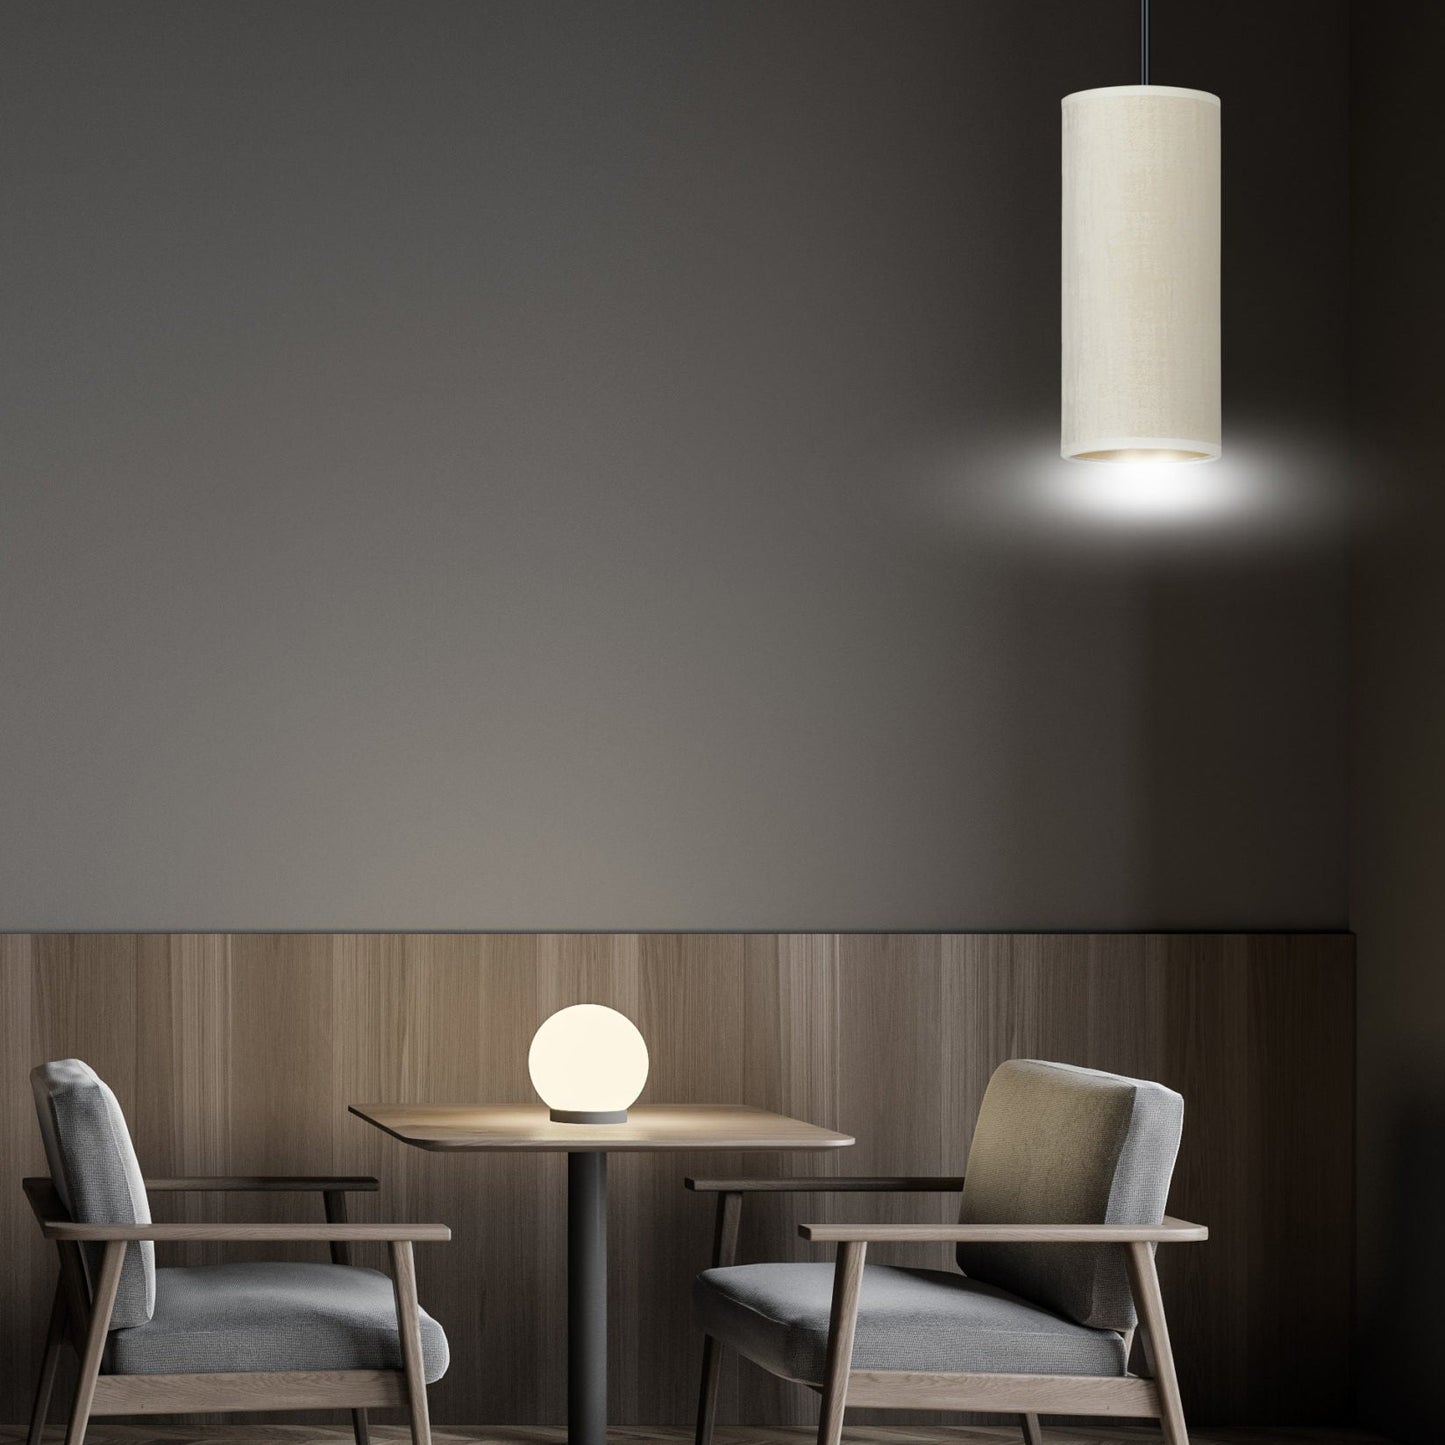 Our Bente wall light is modern and contemporary in its design which is inspired by the industrial trend with a touch of opulence. The velvet effect shade is made from a luxury white fabric creating a stand out feature for any wall in your home. The cable is adjustable up to 100cm to suit your desired look.